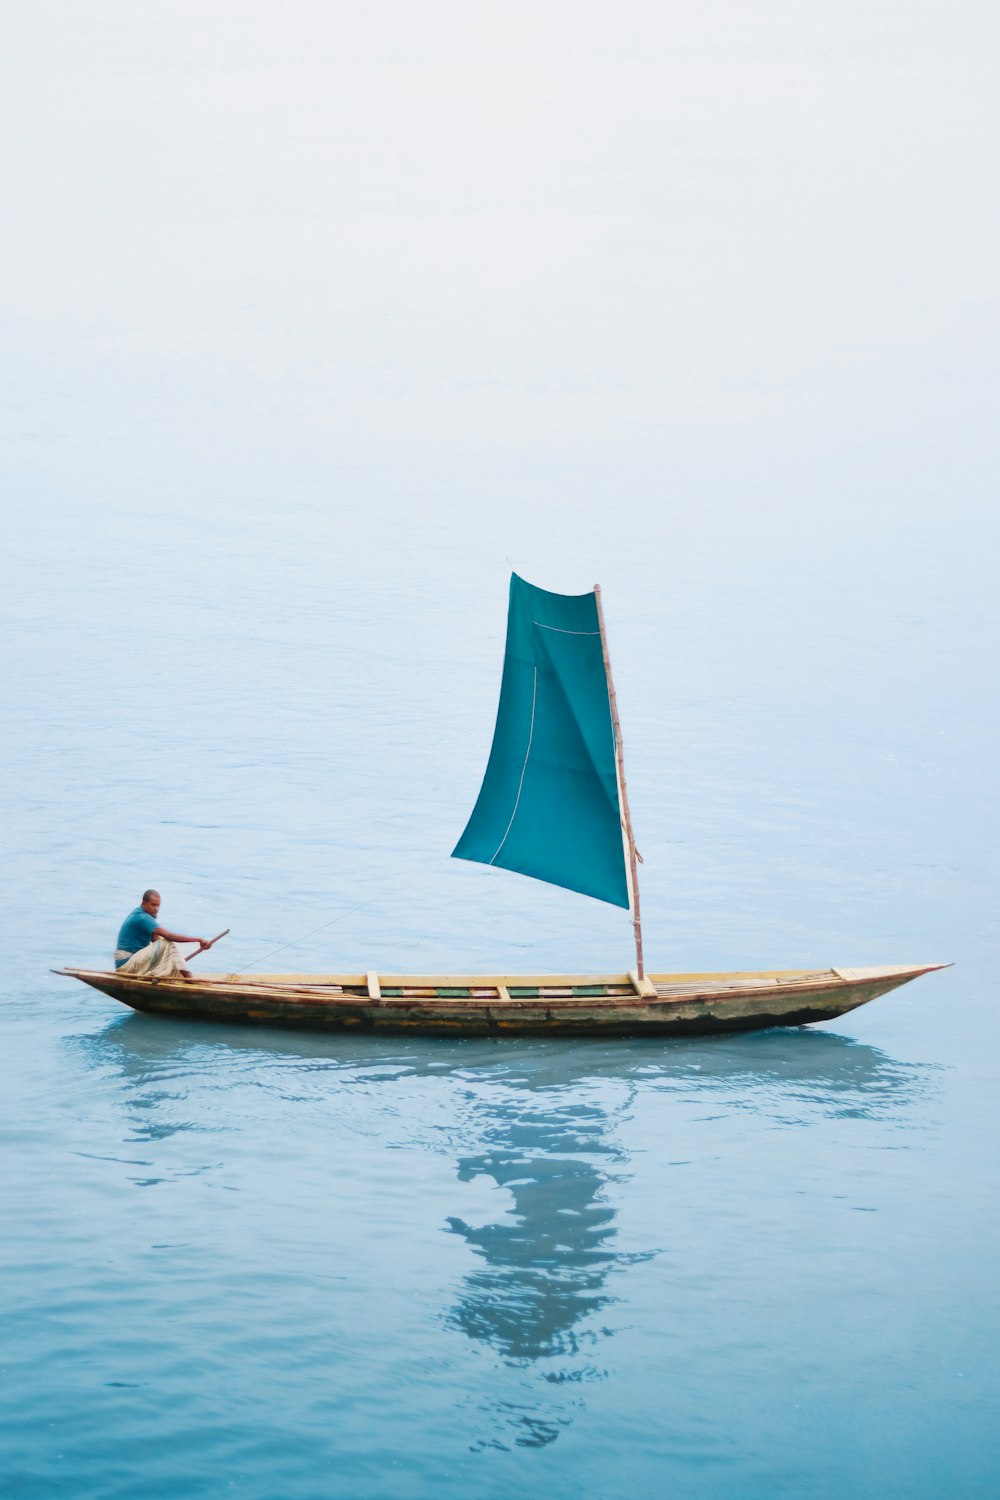 a man is sitting on a small boat in the water